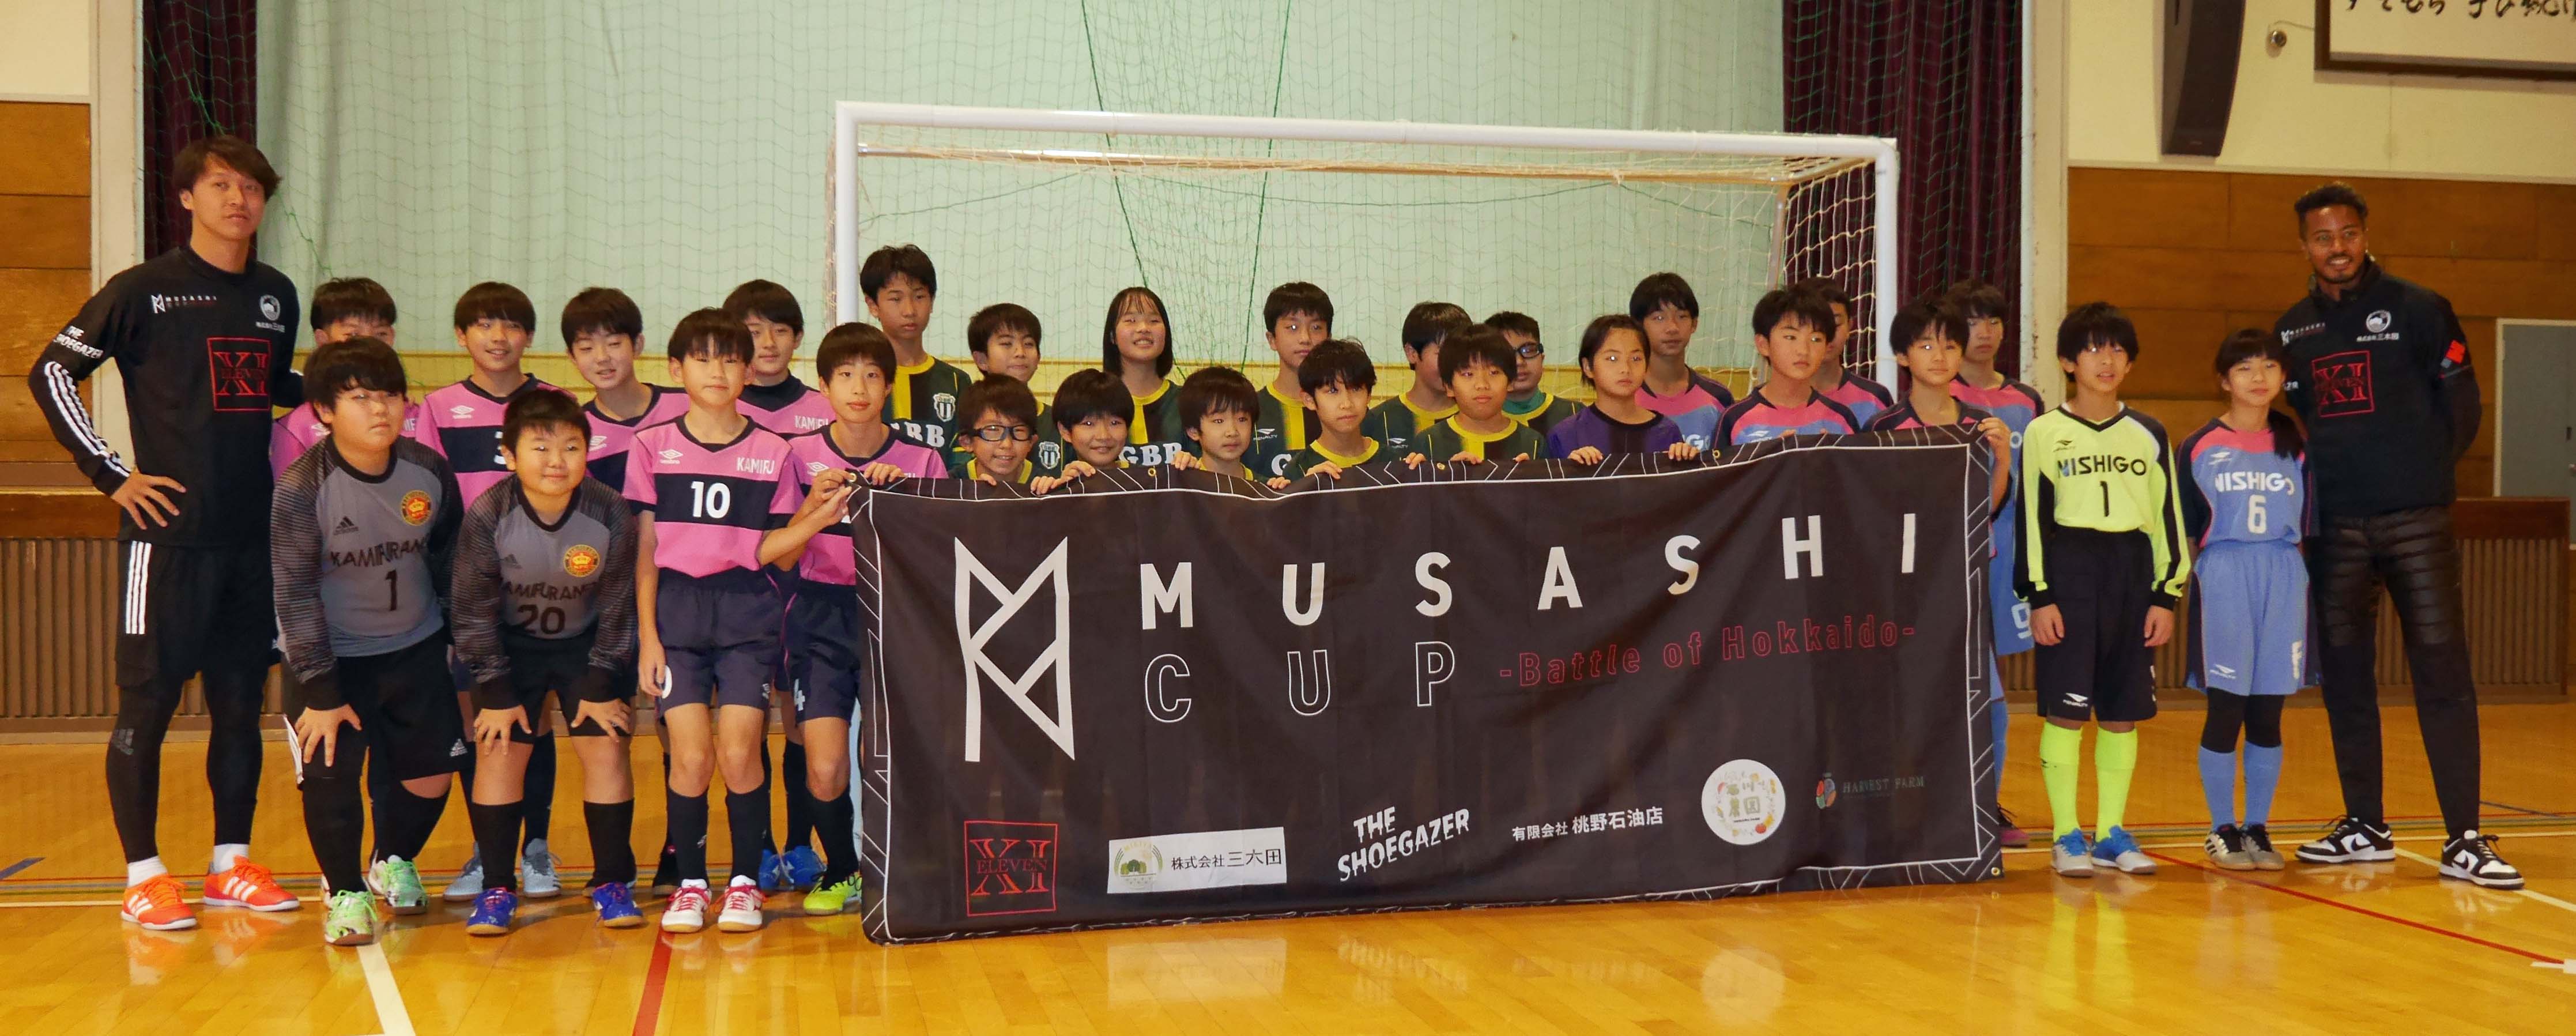 20221126_MUSASHICUP04-01